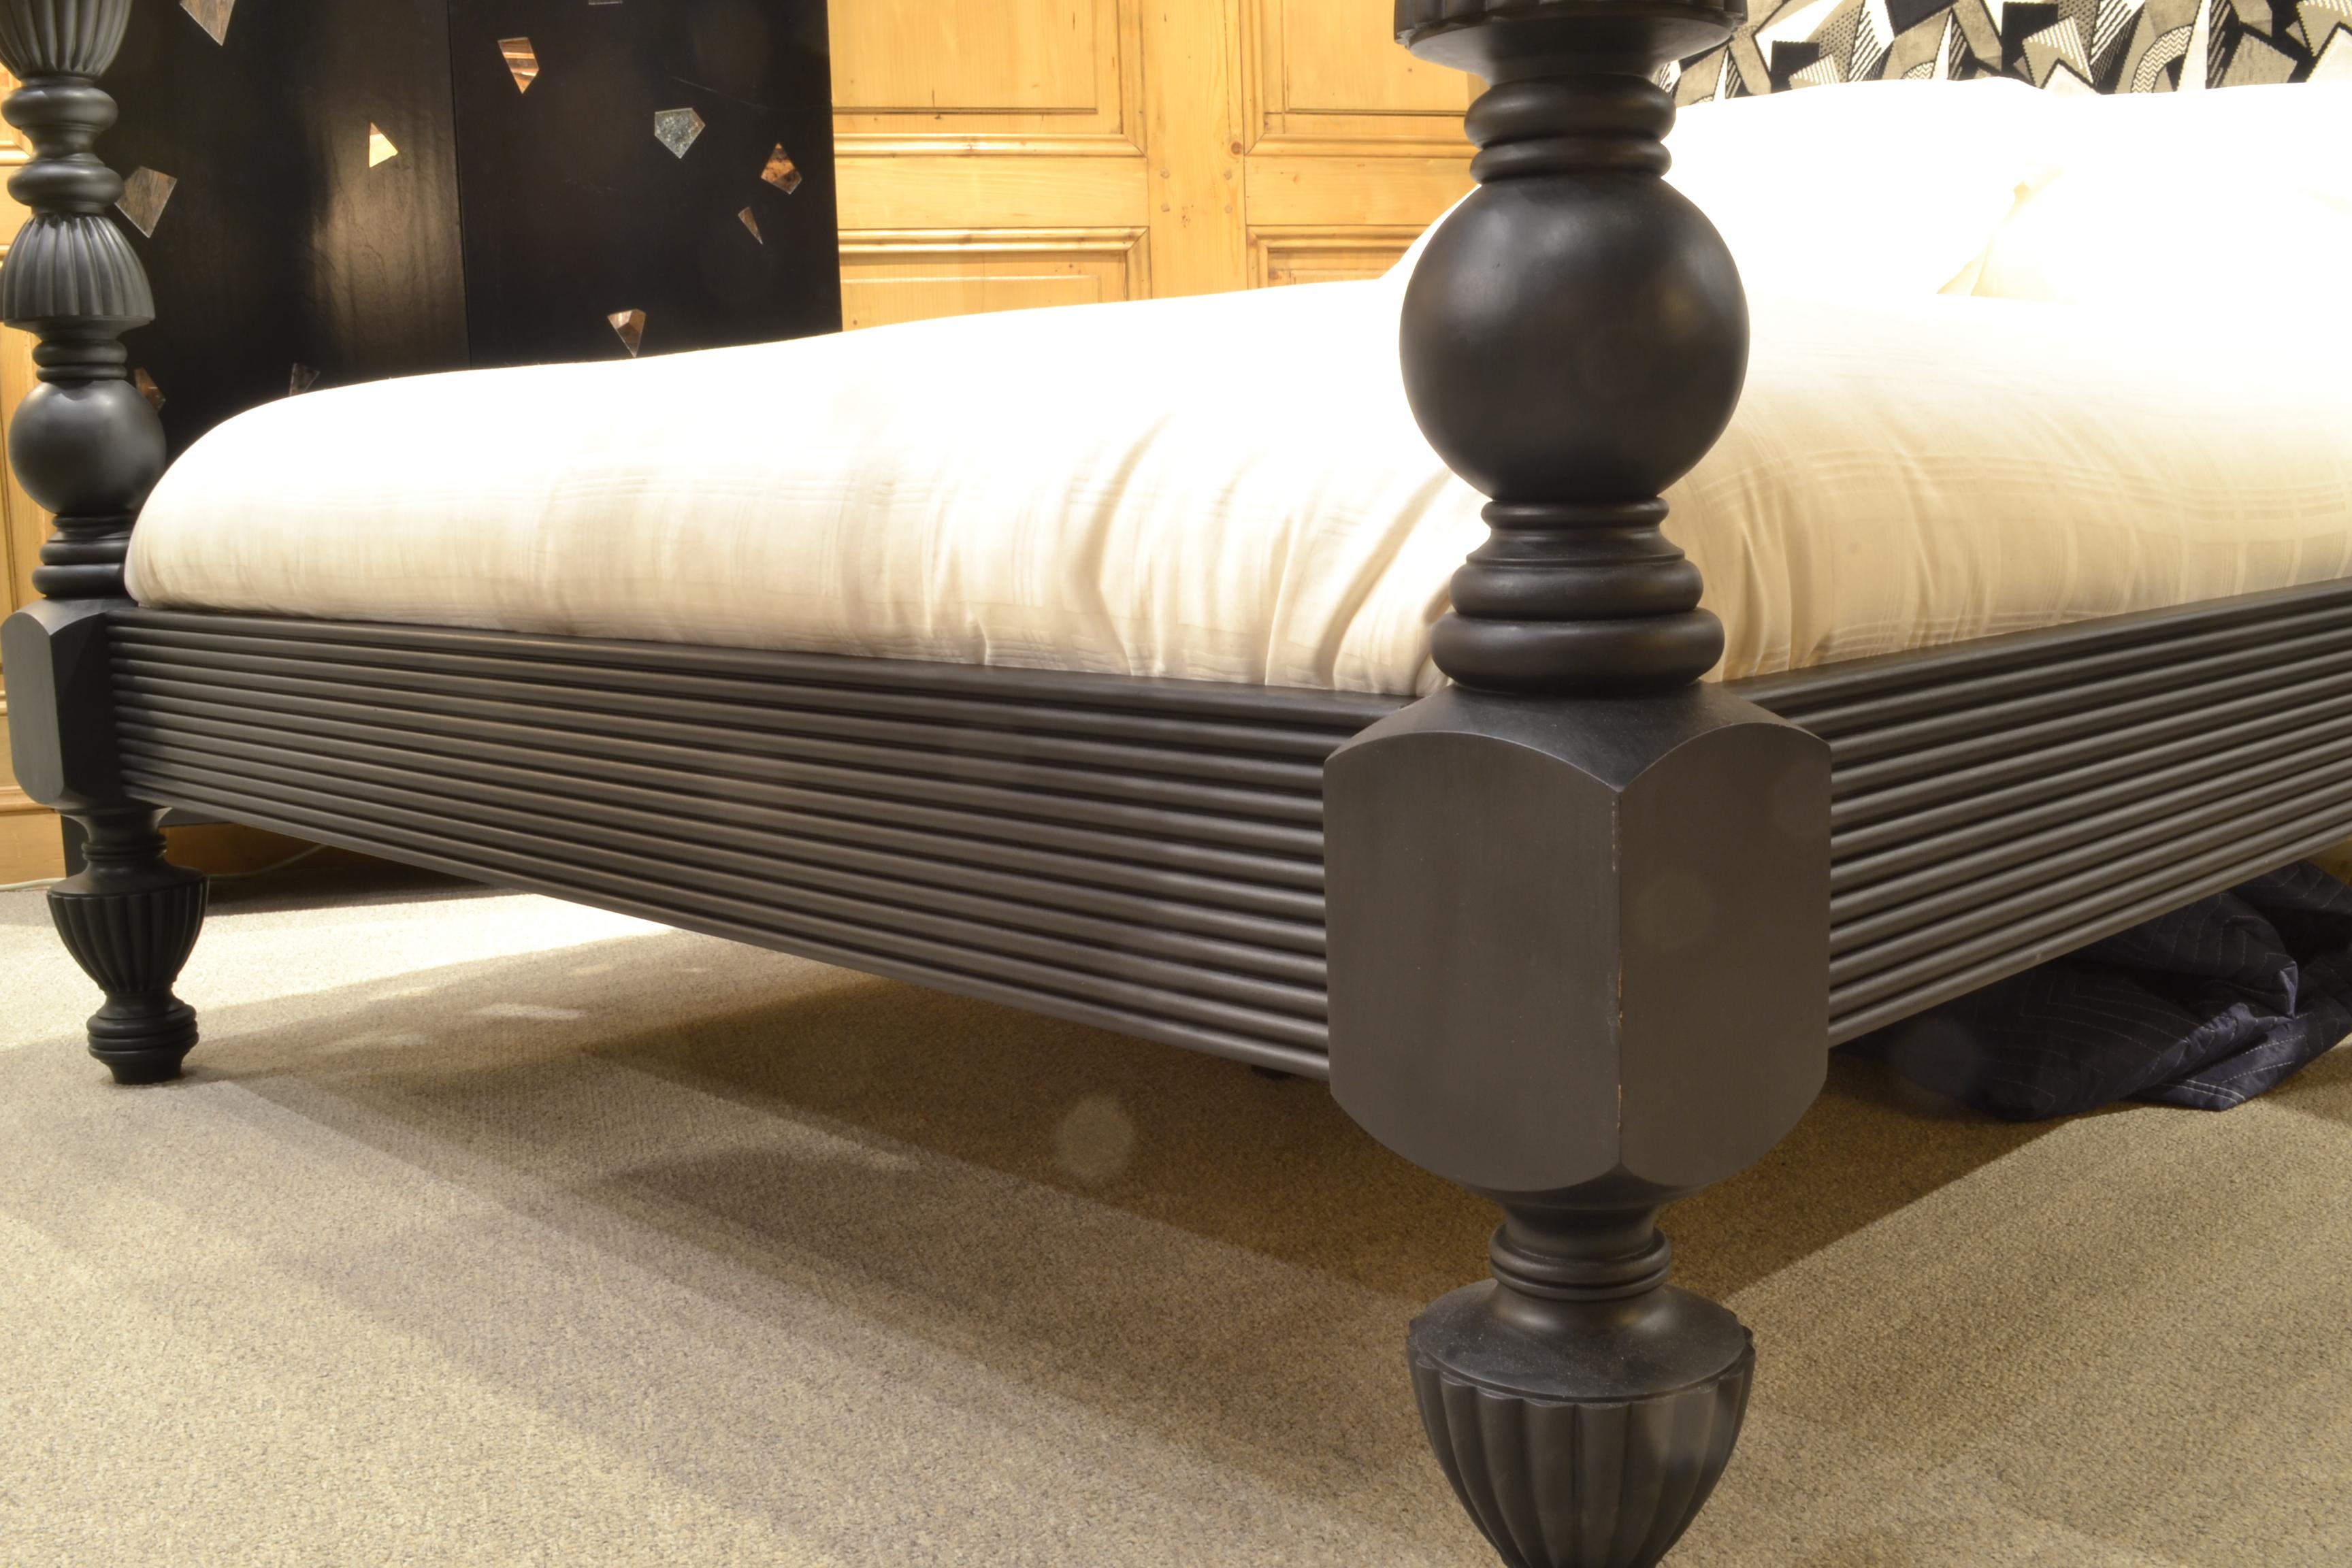 Carved Cubist Upholstery Ebony Brighton Bedframe with Palm Tree Finials